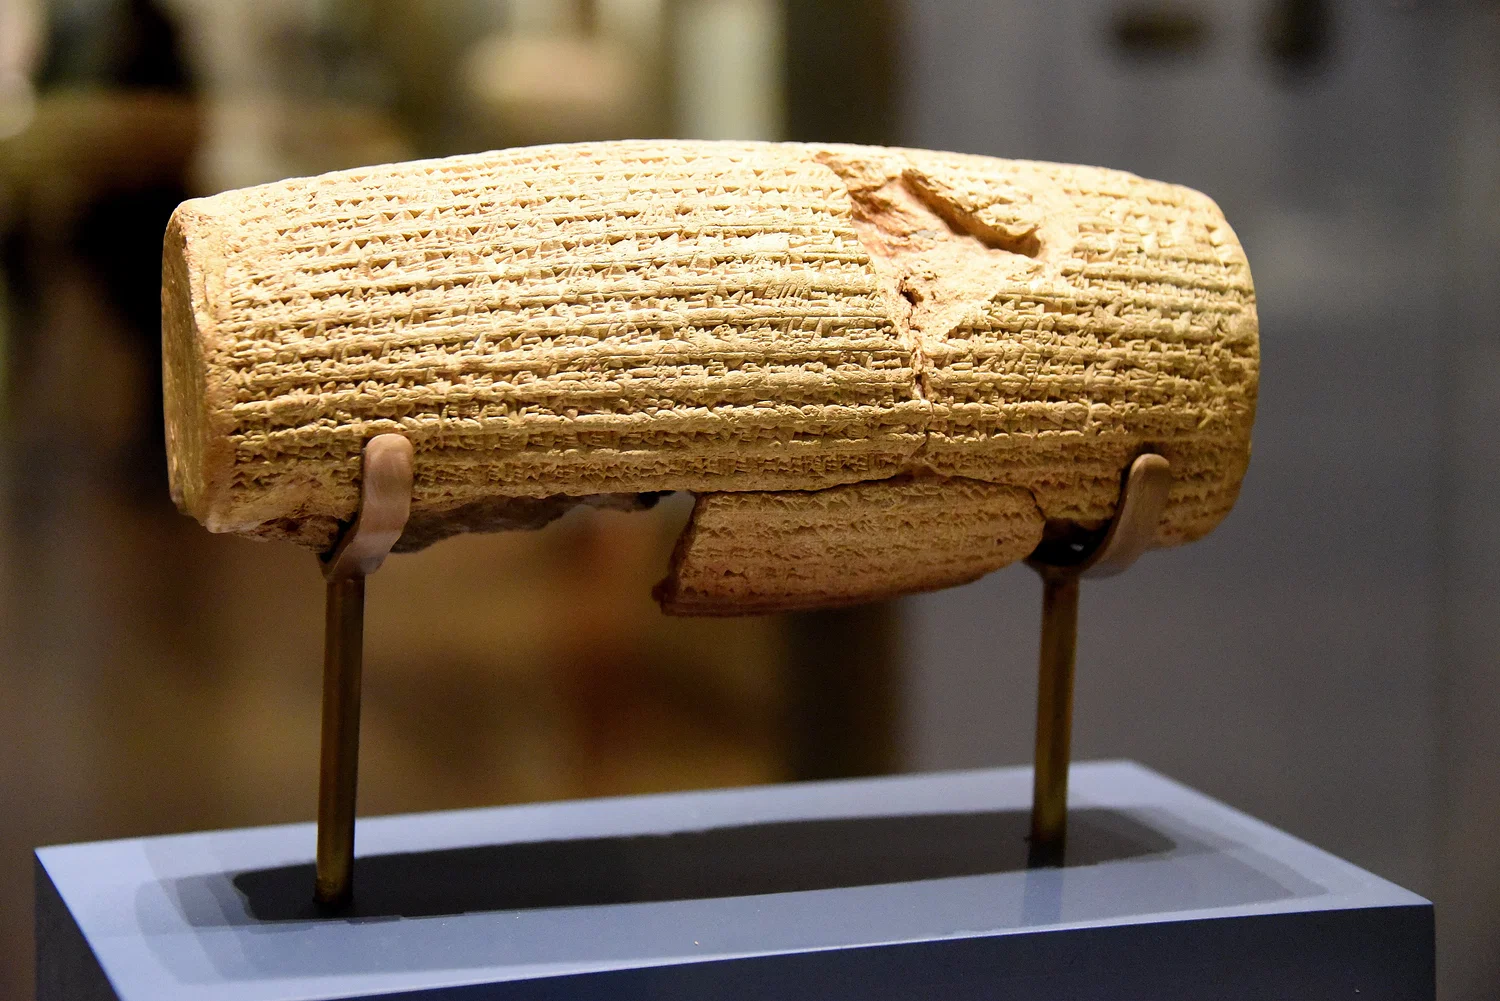 A picture of the Cyrus cylinder on display in the British Museum.